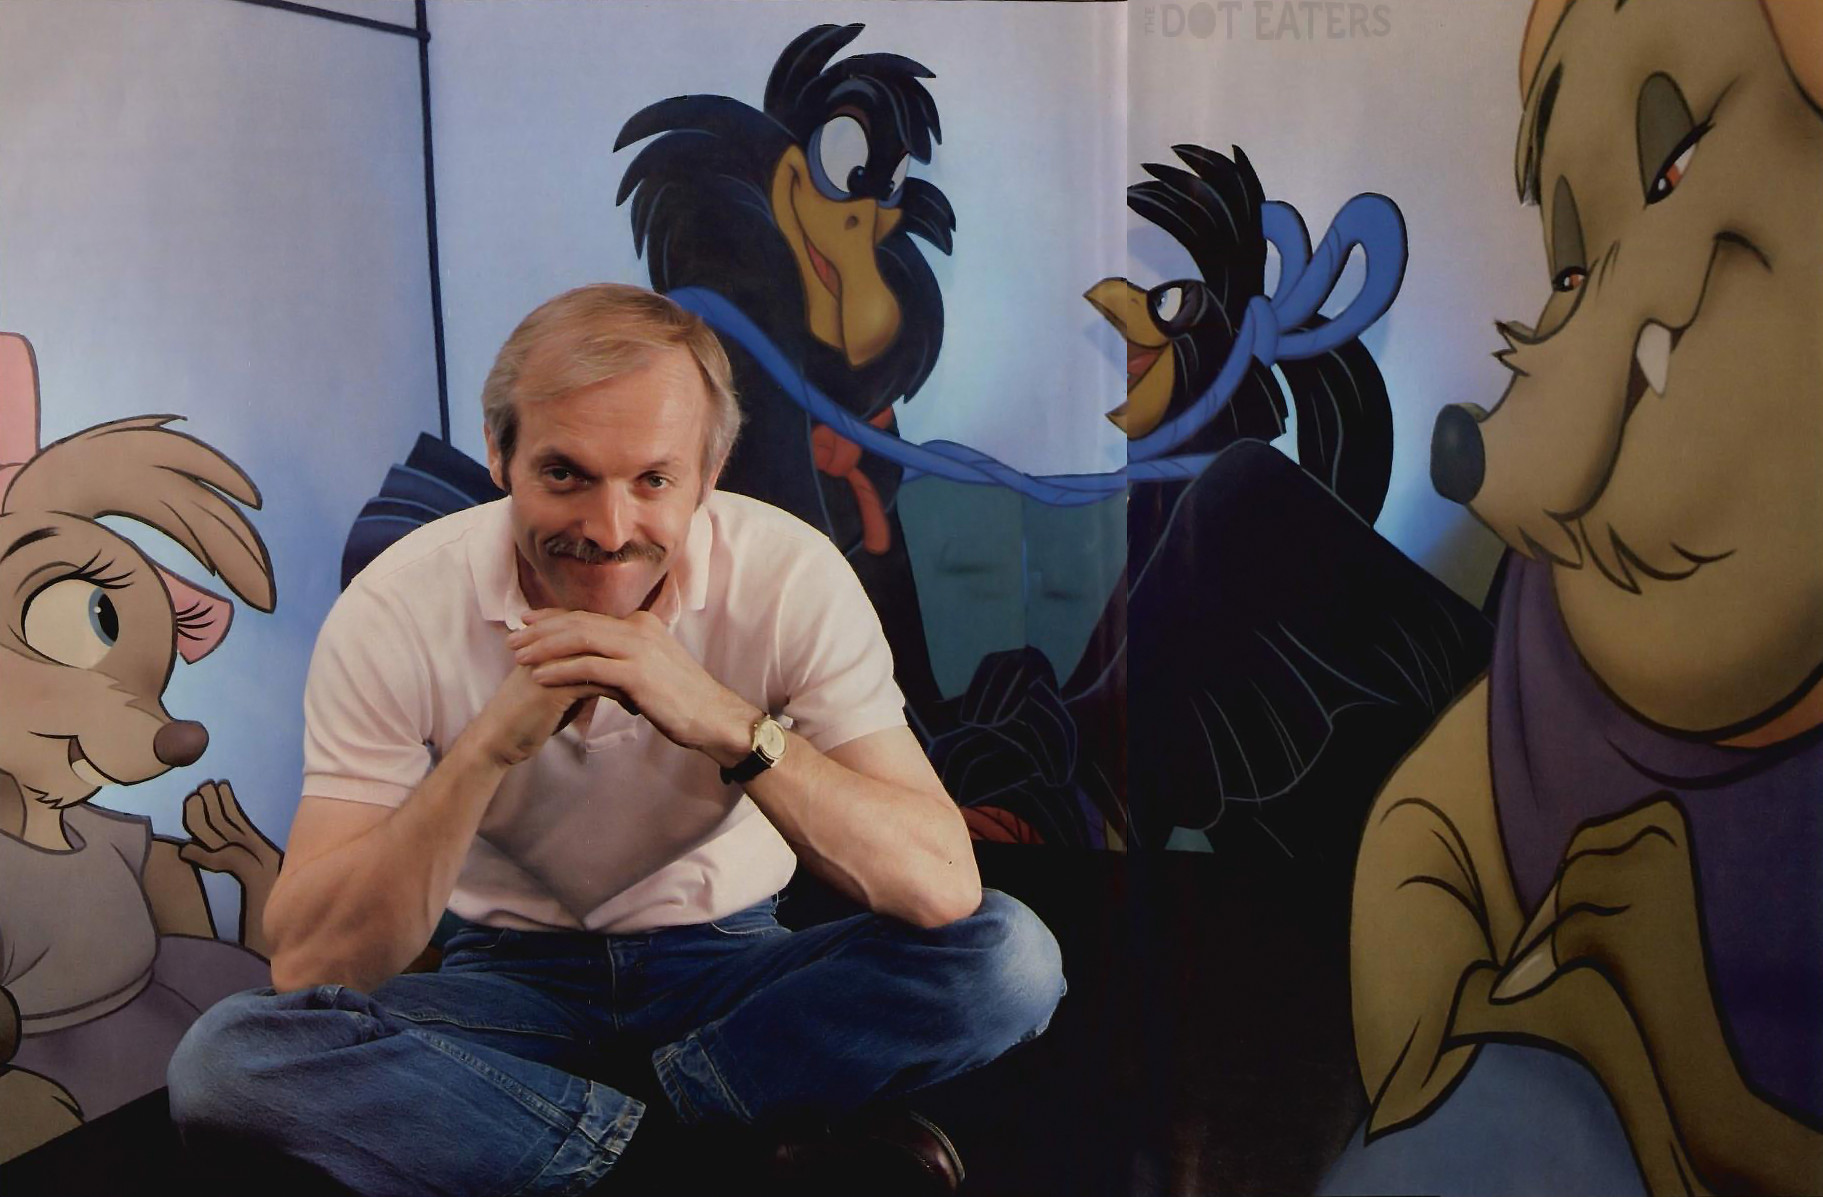 Animator Don Bluth, with NIMH characters behind, 1984